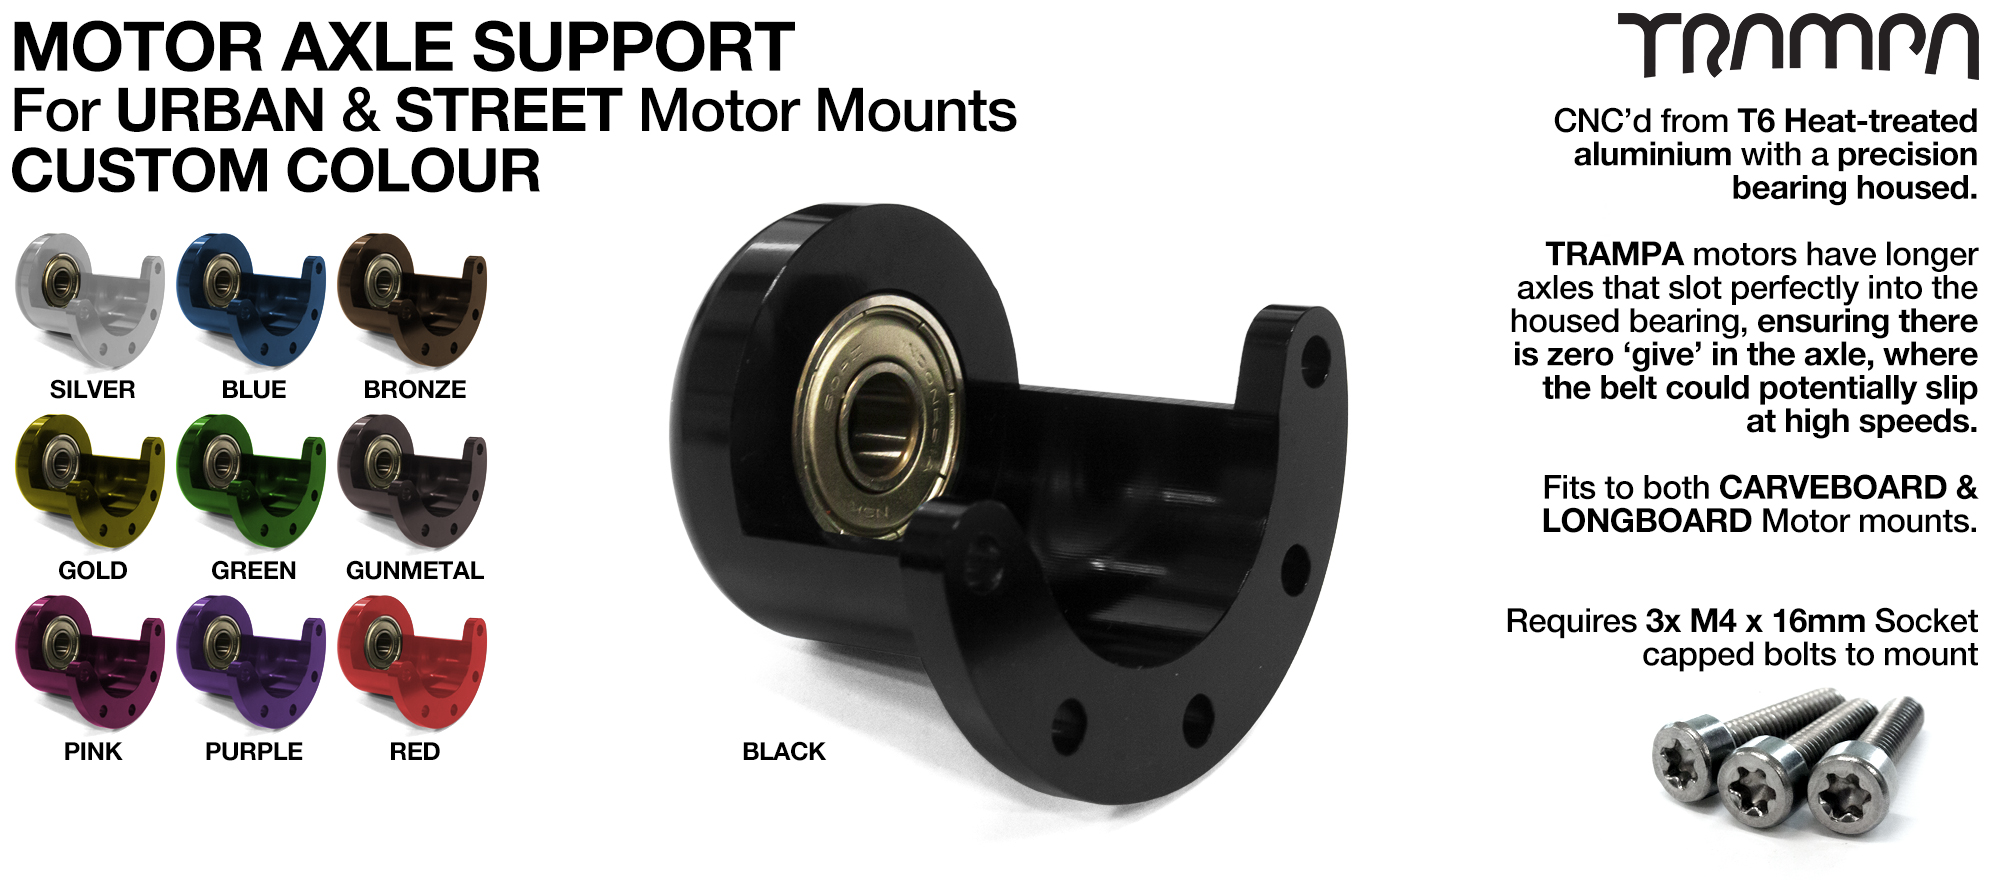 CARVE BOARD Motor Axle Support for Motor Mounts  